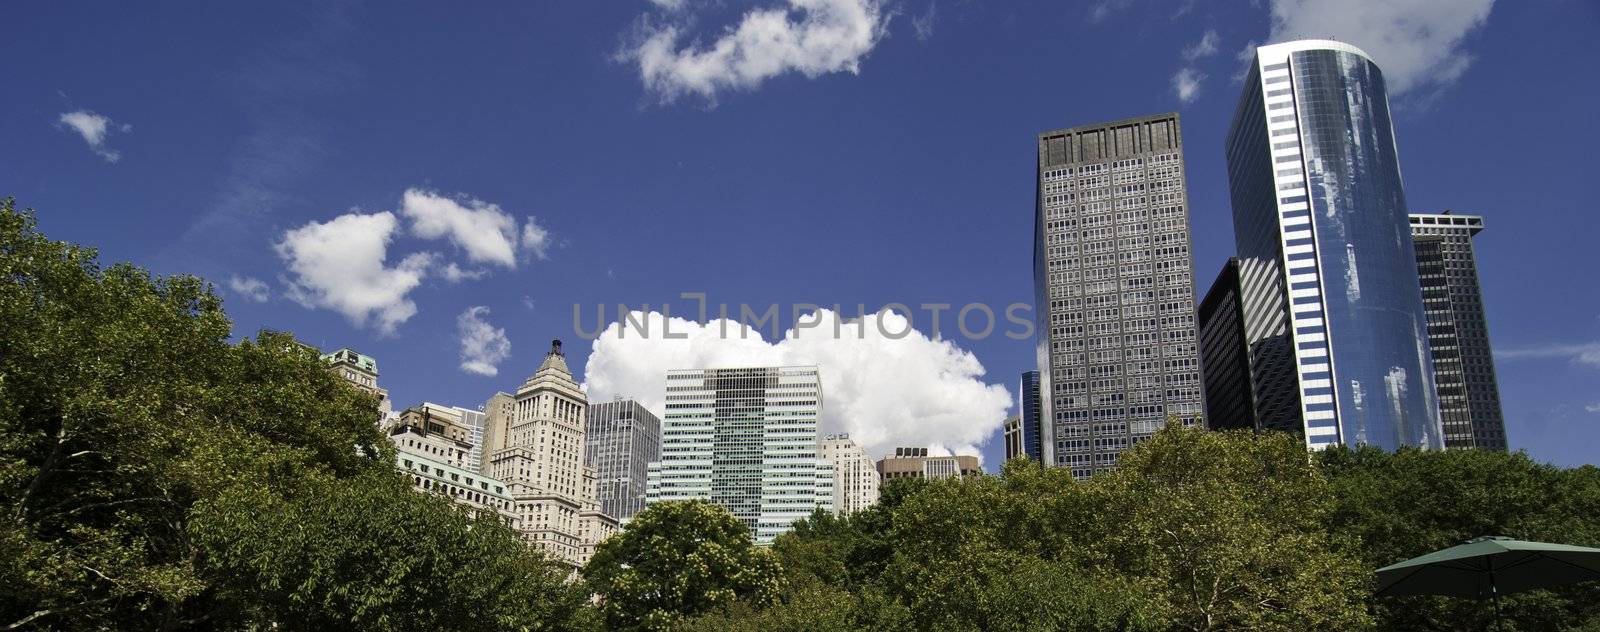 Panoramic View of New York City Buildings by jovannig